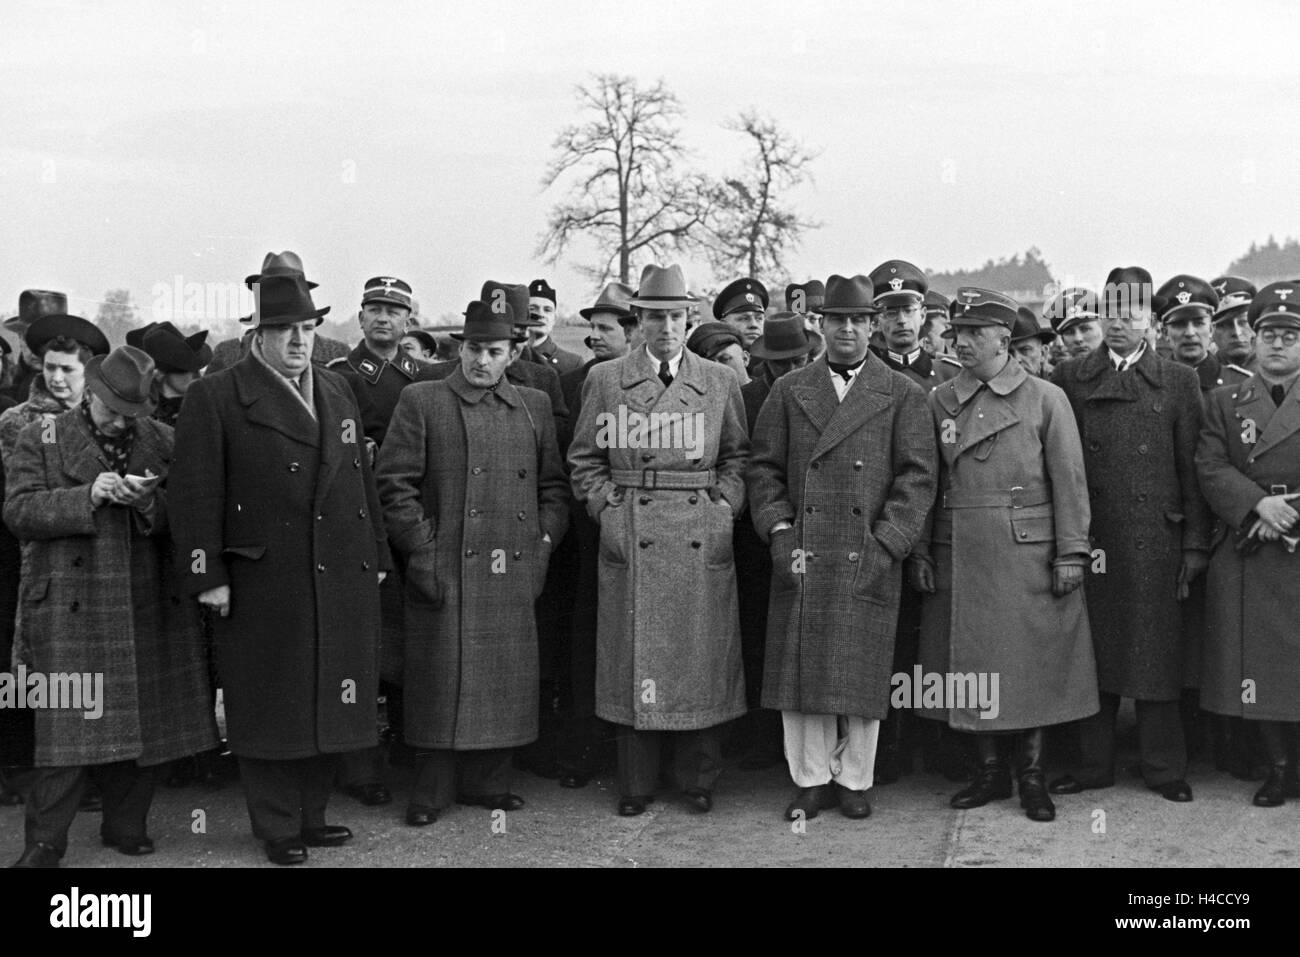 NS officials, celebrities and onlooker listen in to the speech of a NS dignitary in front of the world record attempt with Mercedes Benz W 125, Germany the 1930s. Nazi officials, celebrities and onlookers listening to the spreech of a Nazi dignitary in front of the start the world record trial with the Mercedes Benz W 125, Germany 1930see. Stock Photo